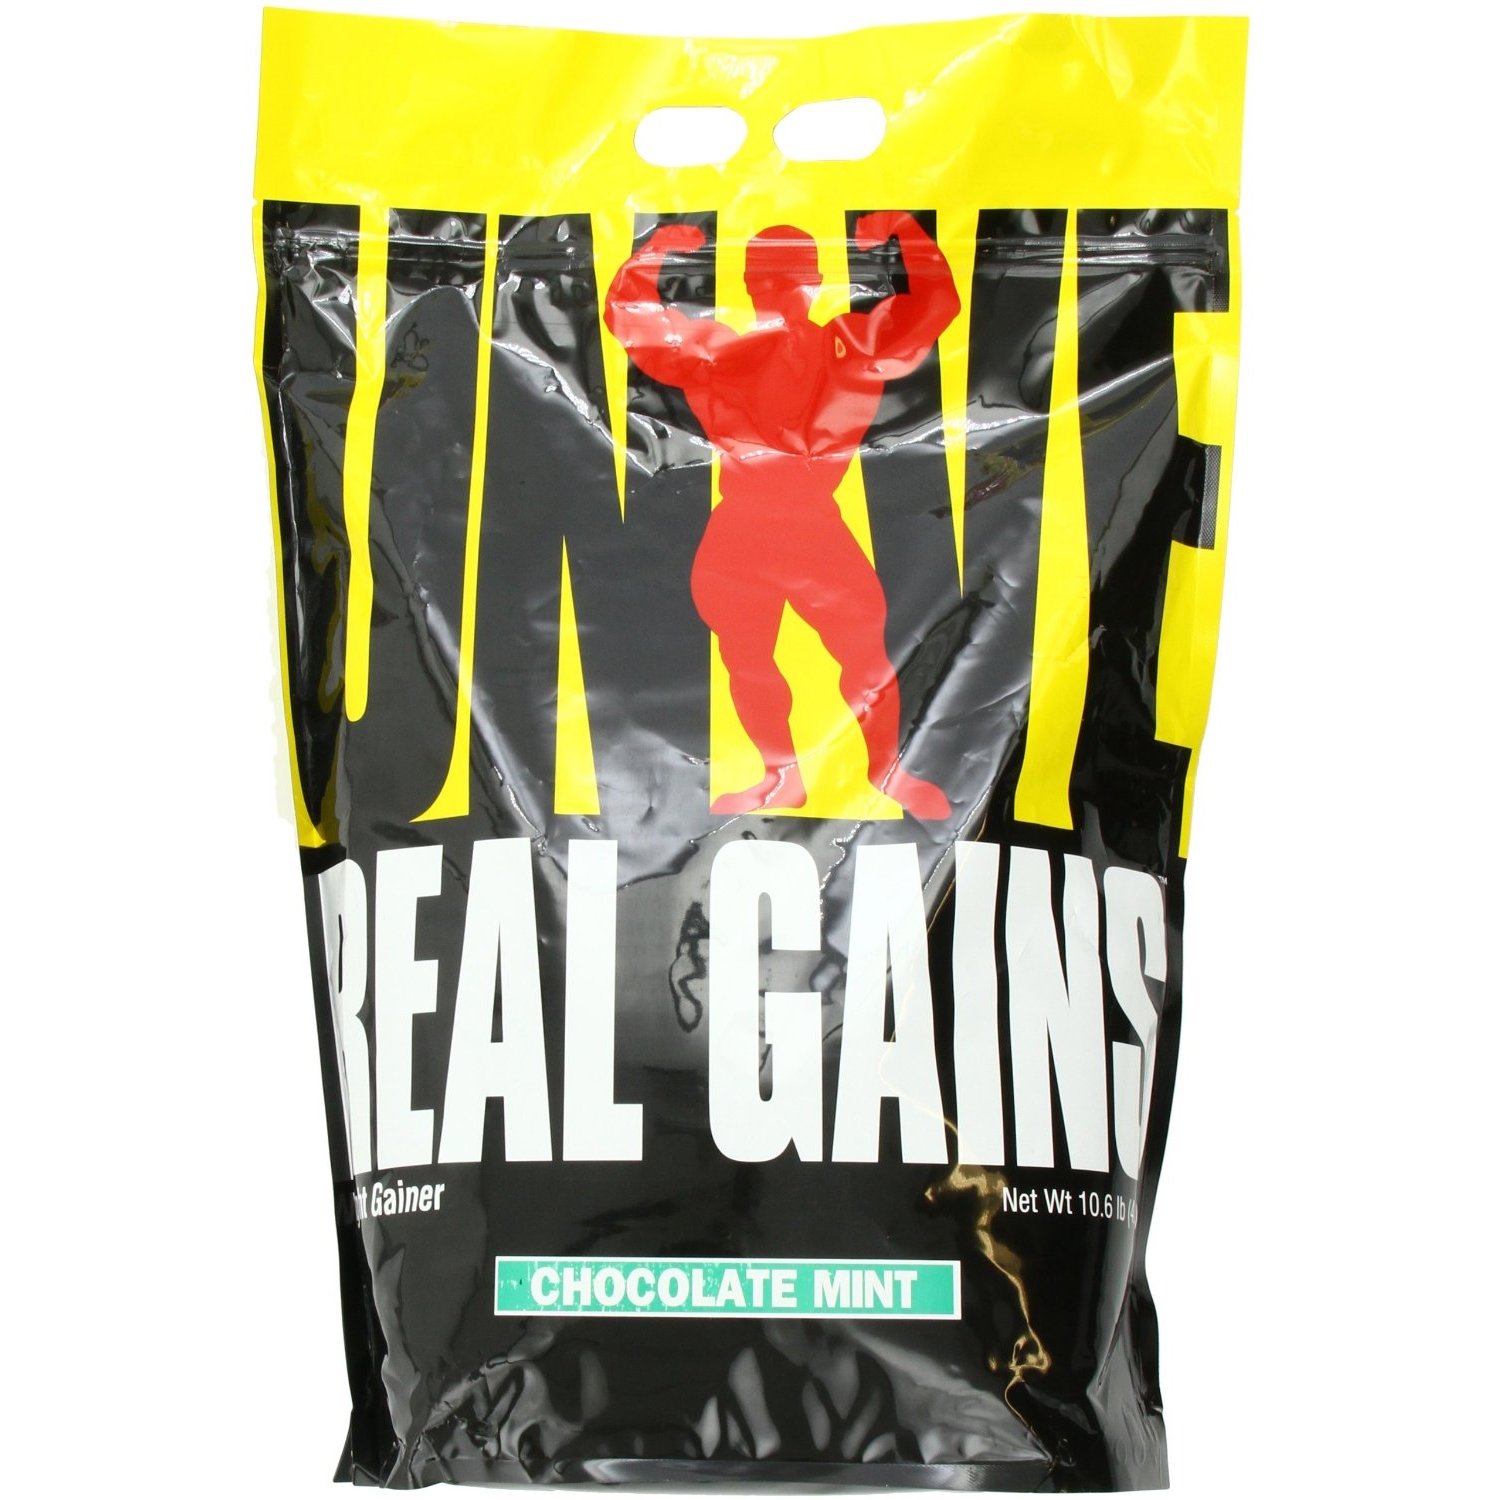 Universal Nutrition Real Gains